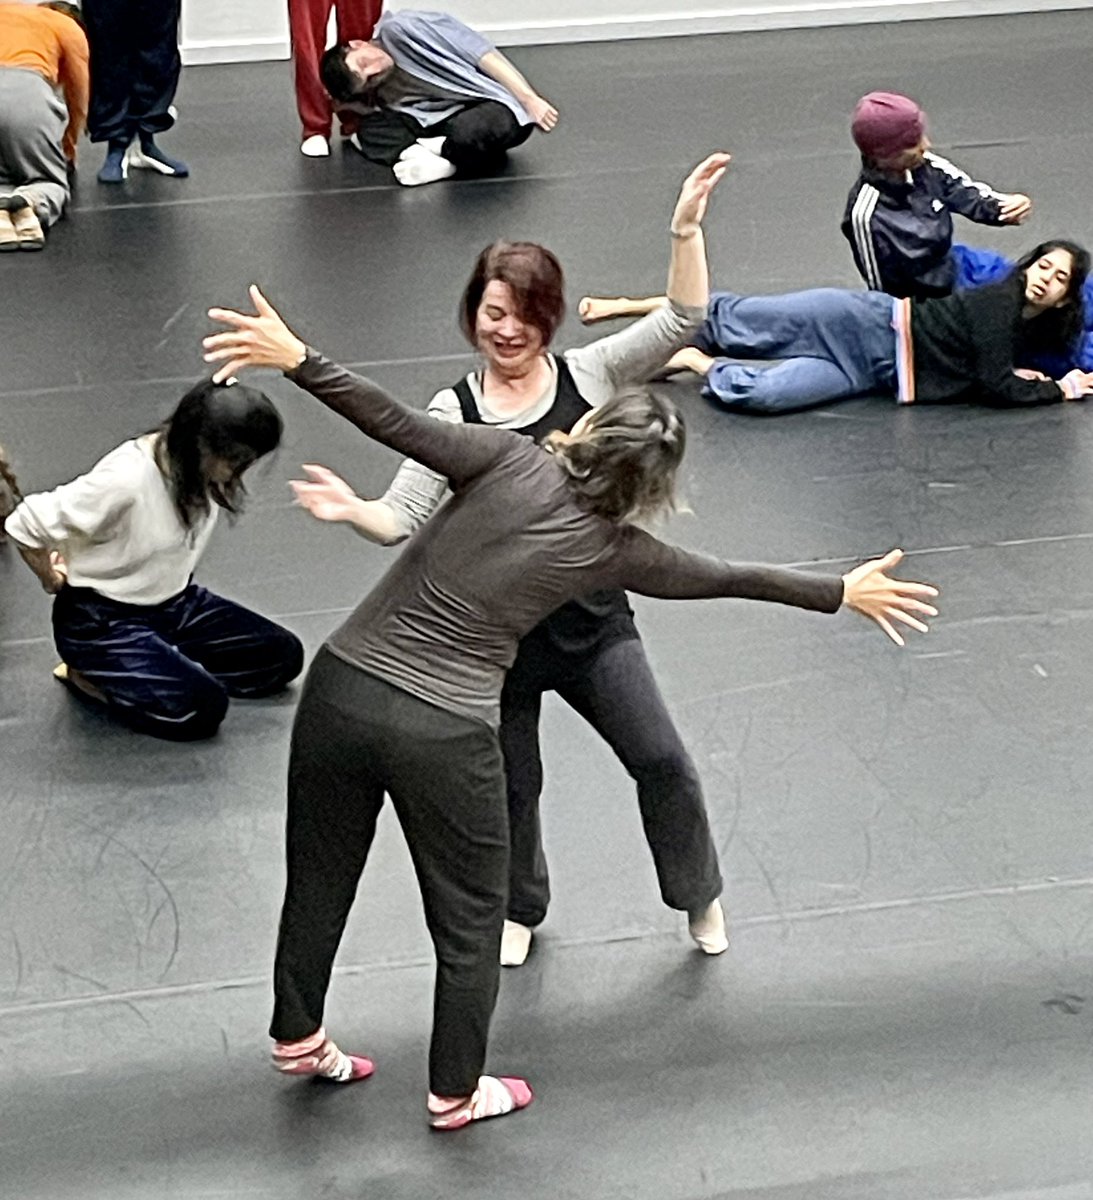 Such fun at the Choreographing the pluriverse event part of the #danceresearchmatters network #dance #Research @BathSpaUni @ahrcpress #dancingotherwise